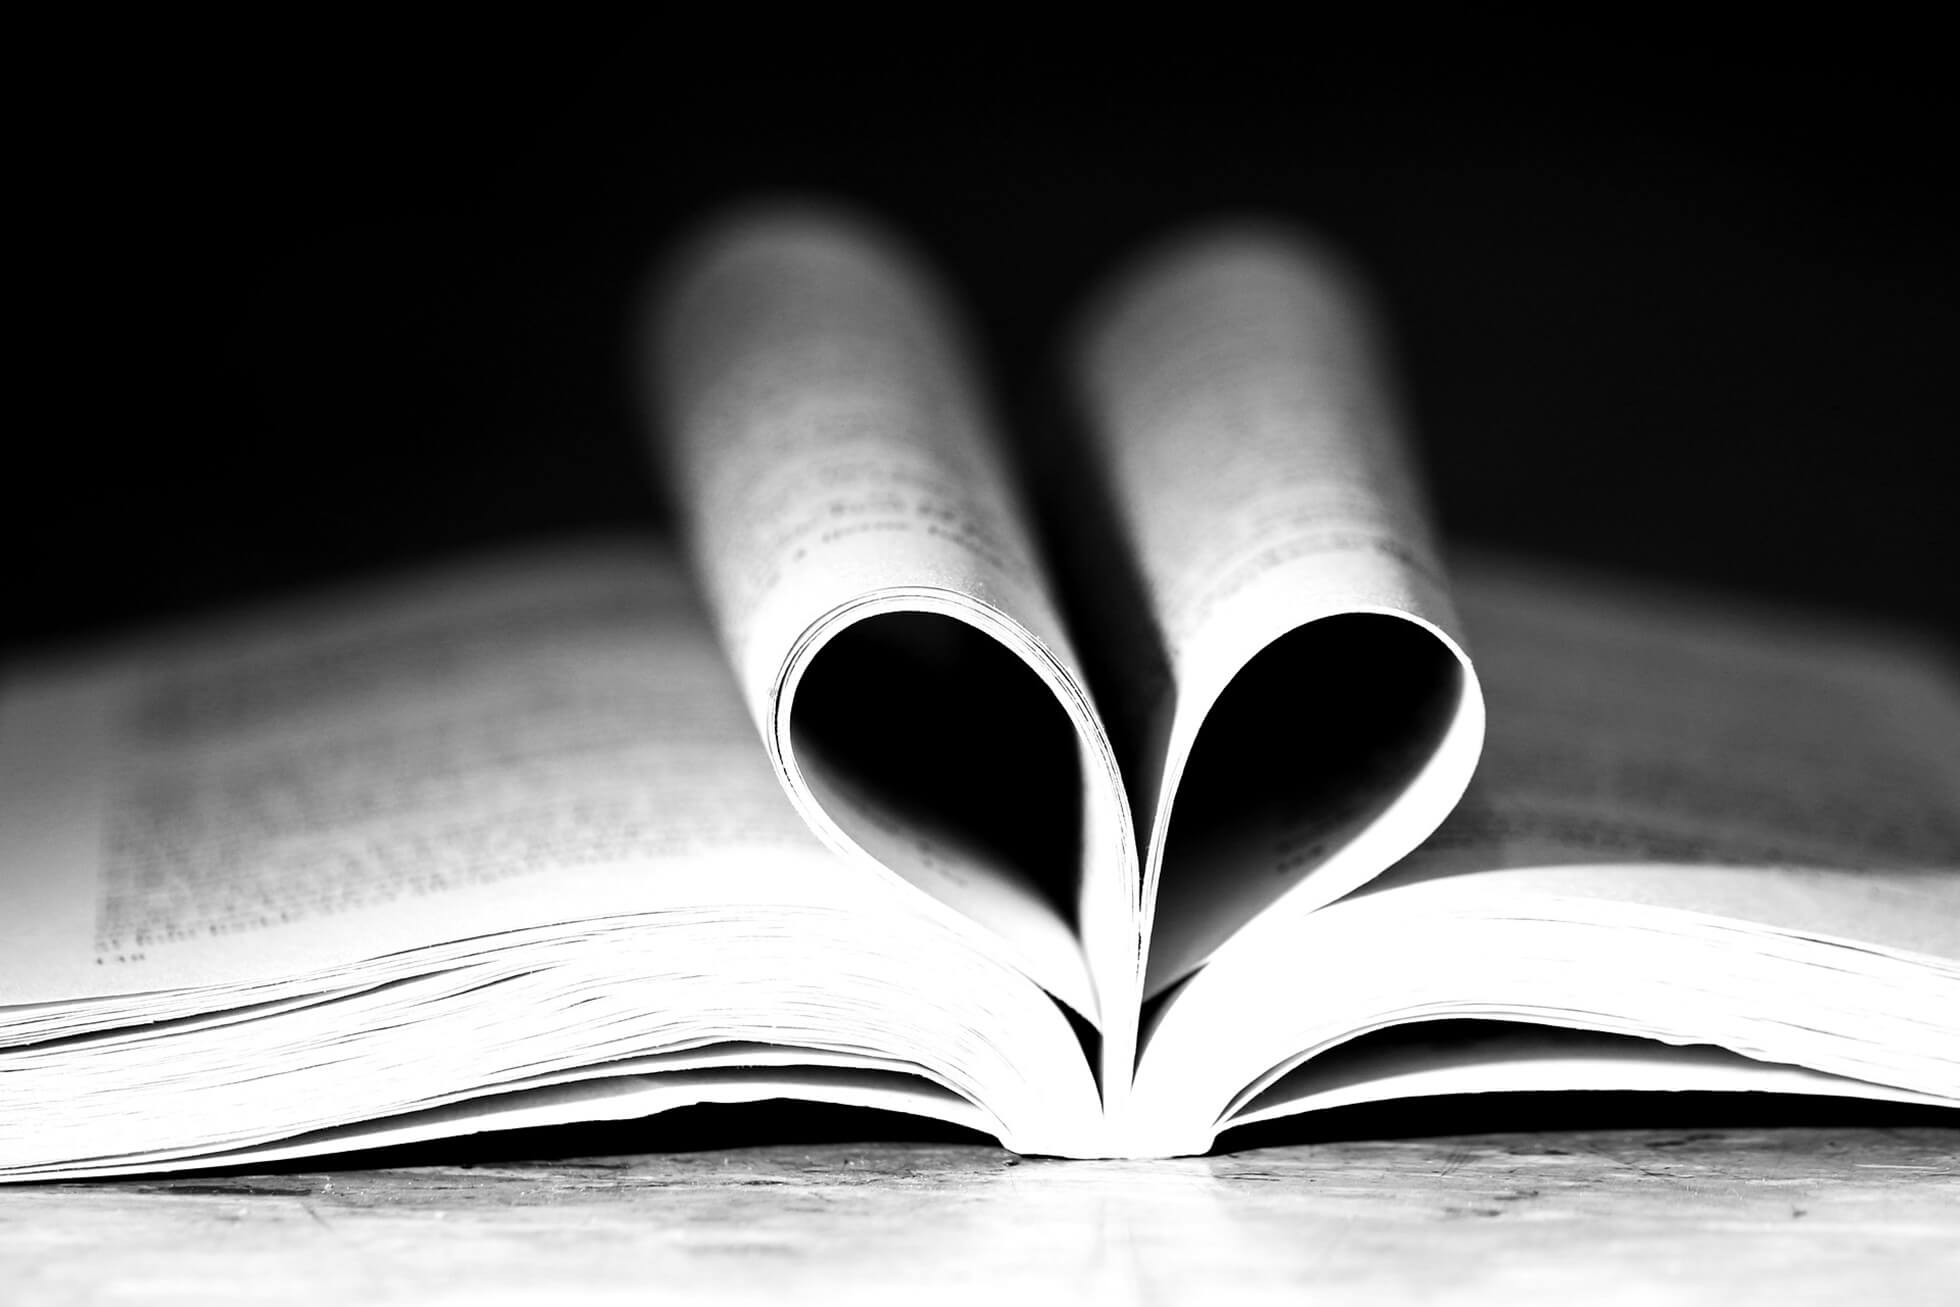 a book open flat with its middle pages folded in half to resemble a heart shape